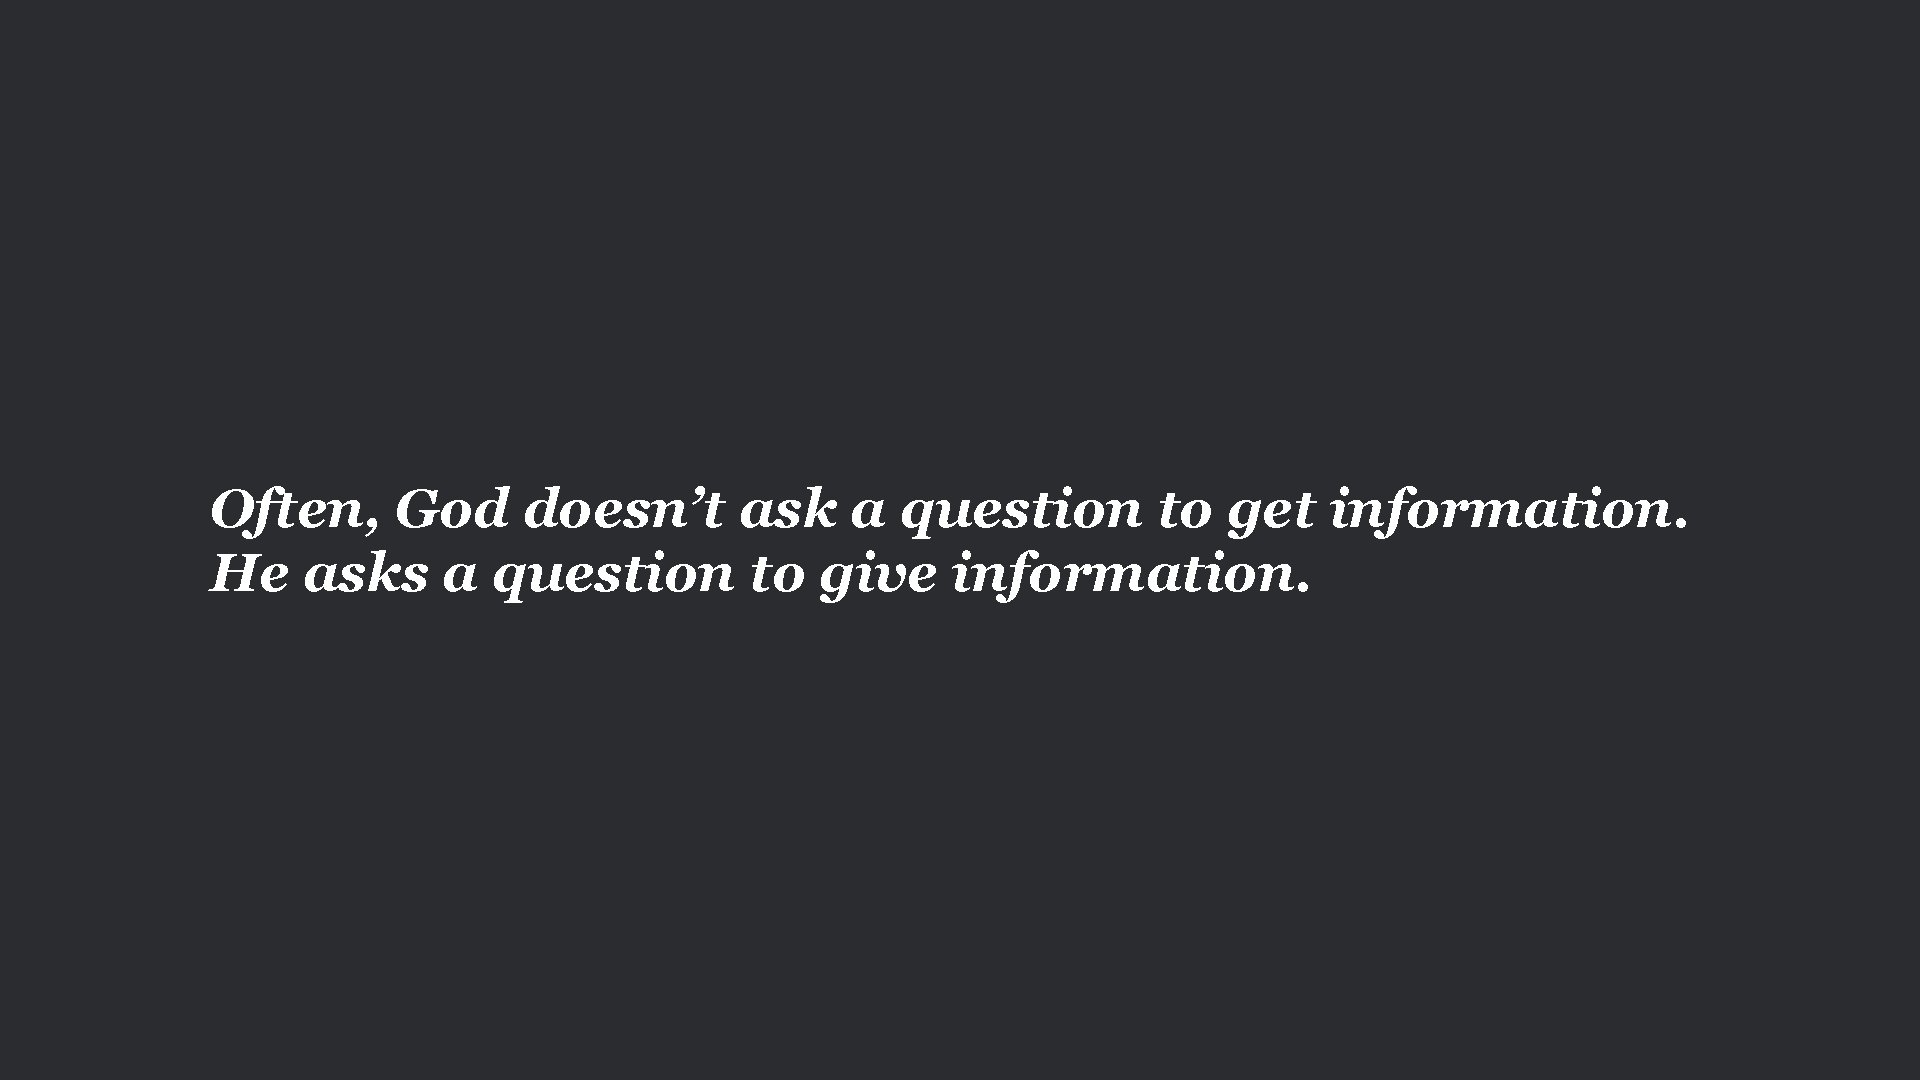 Often, God doesn’t ask a question to get information. He asks a question to